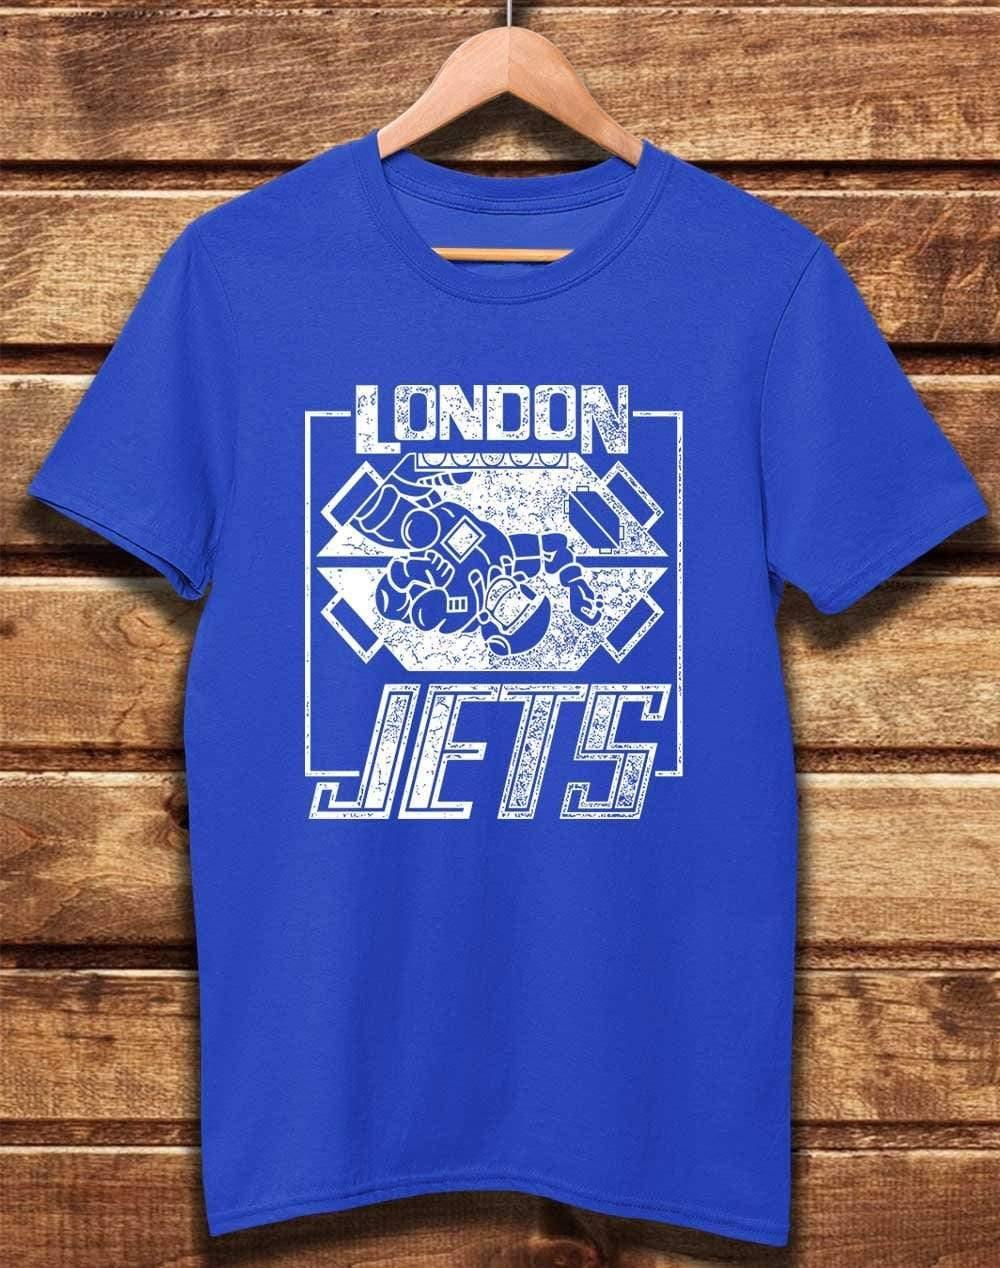 DELUXE London Jets Organic Cotton T-Shirt XS / Bright Blue  - Off World Tees